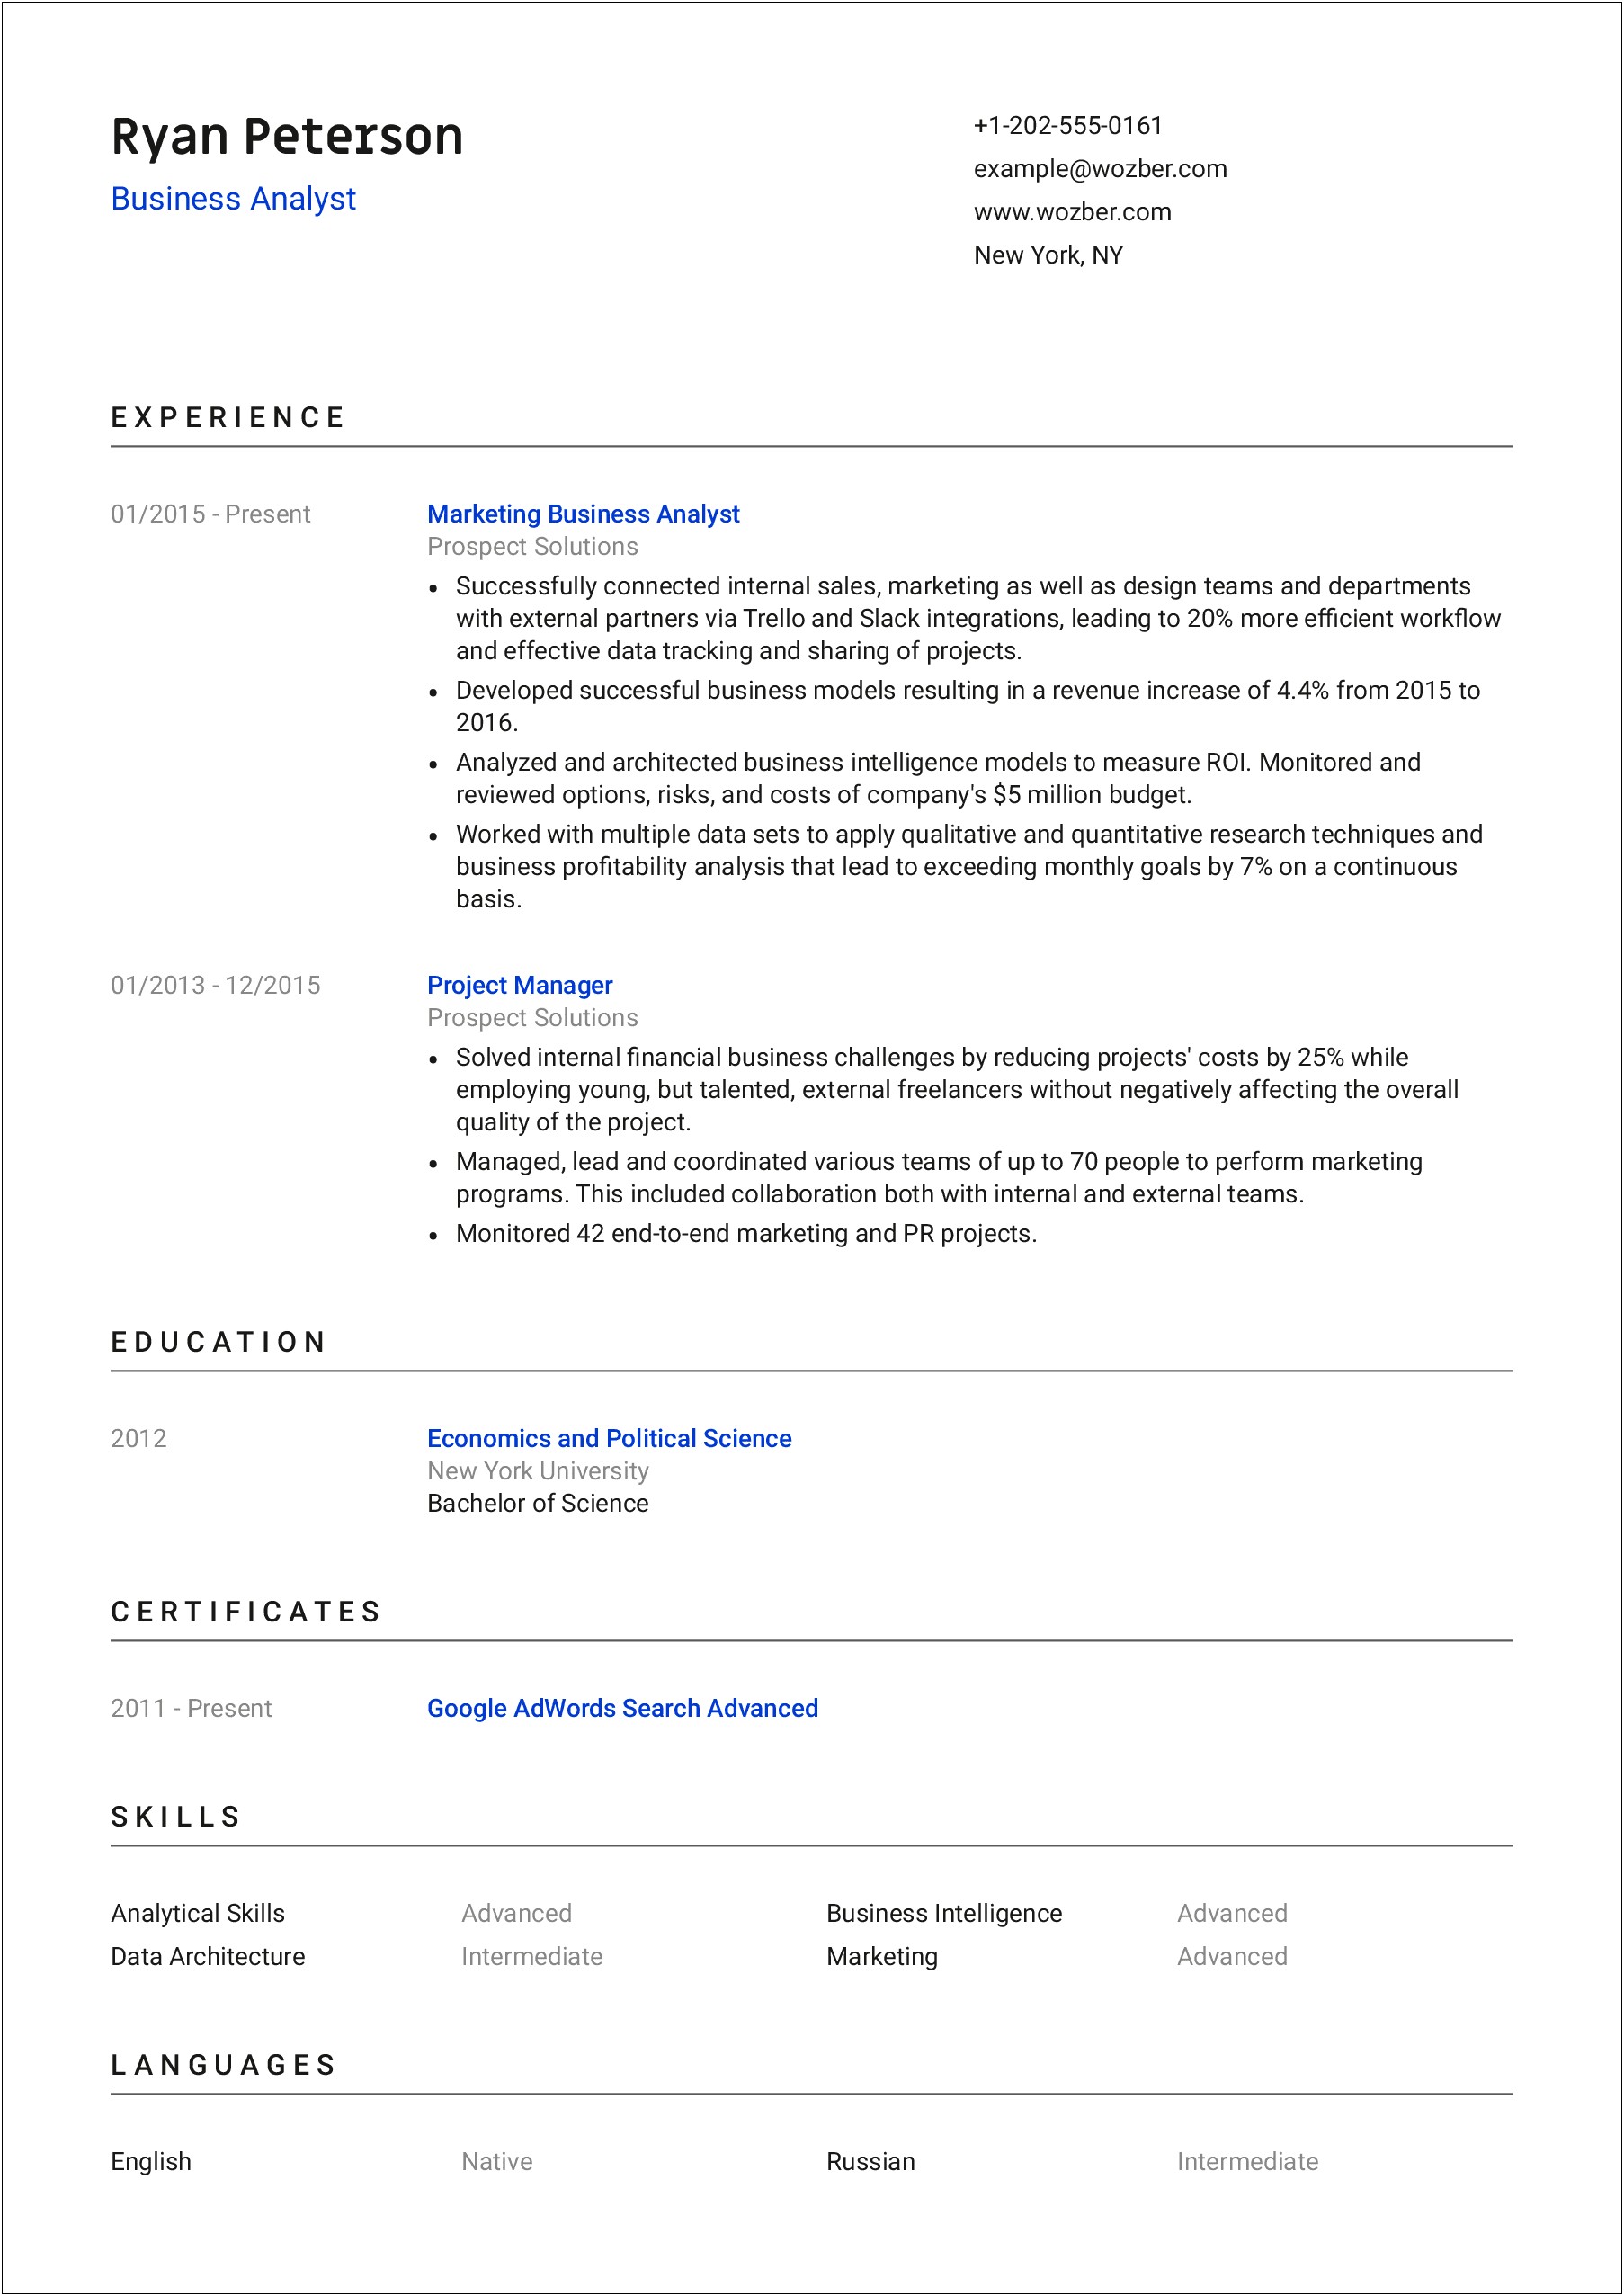 Listing Contract Work On Resume Example